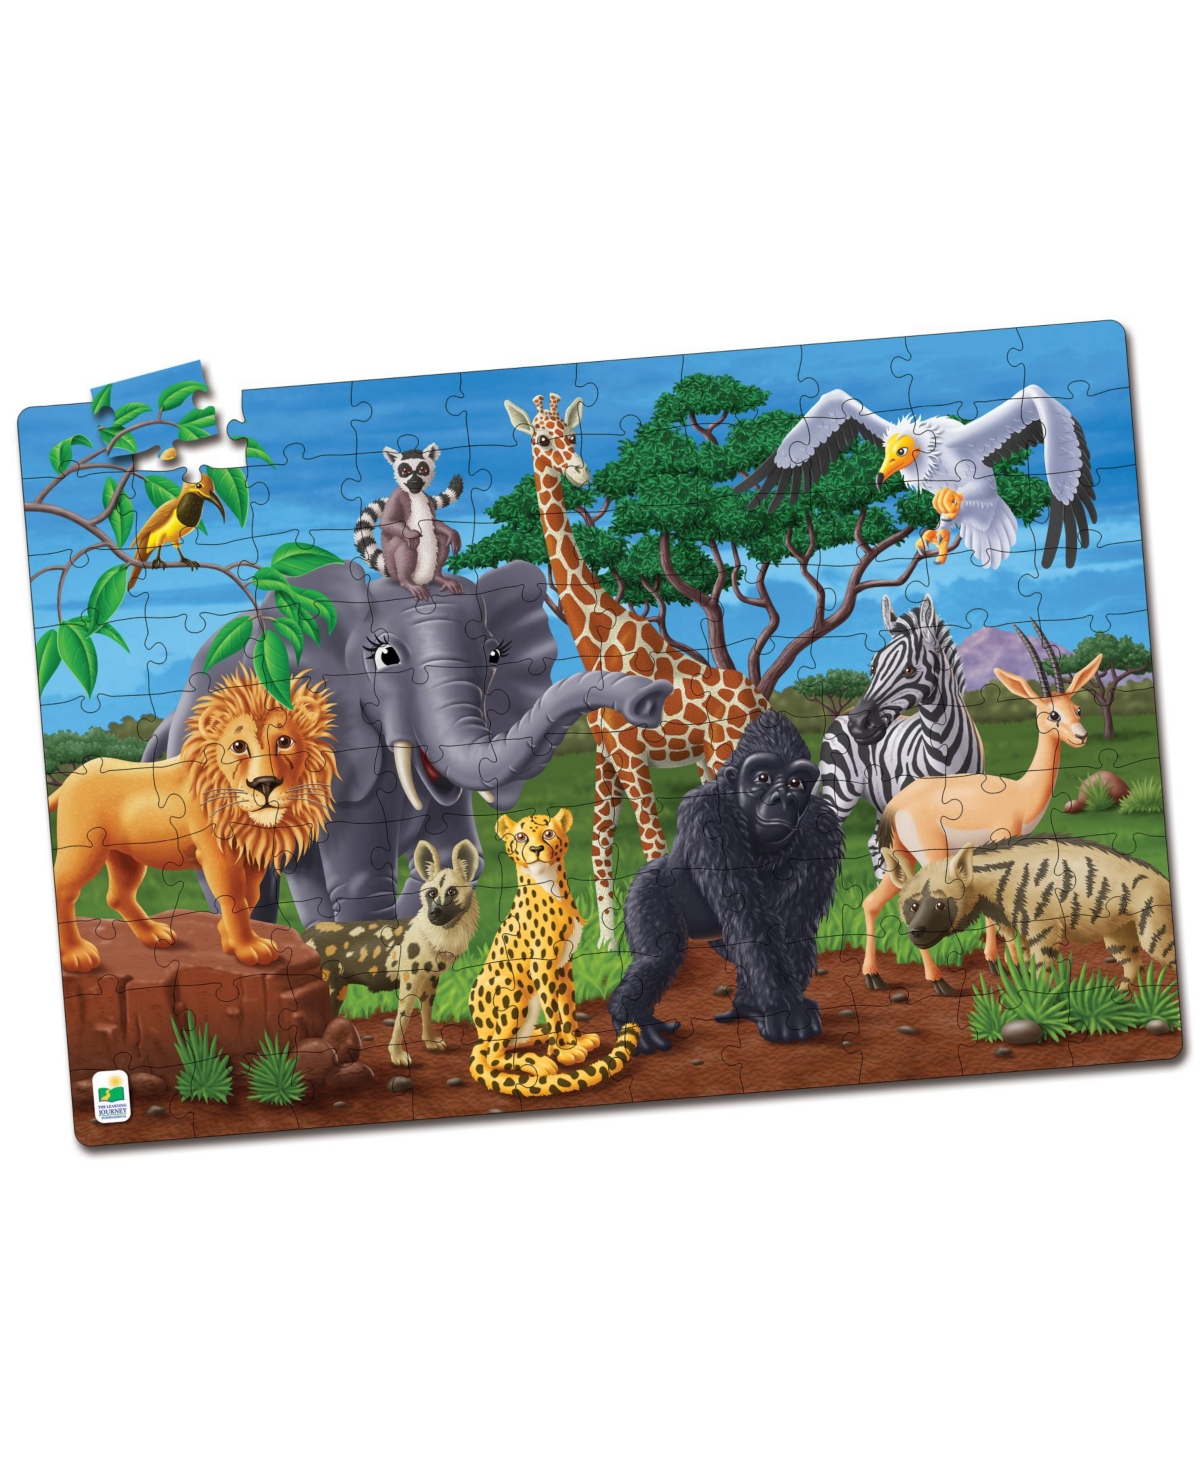 Shop The Learning Journey Puzzle Doubles- Glow In The Dark- Wildlife In Multi